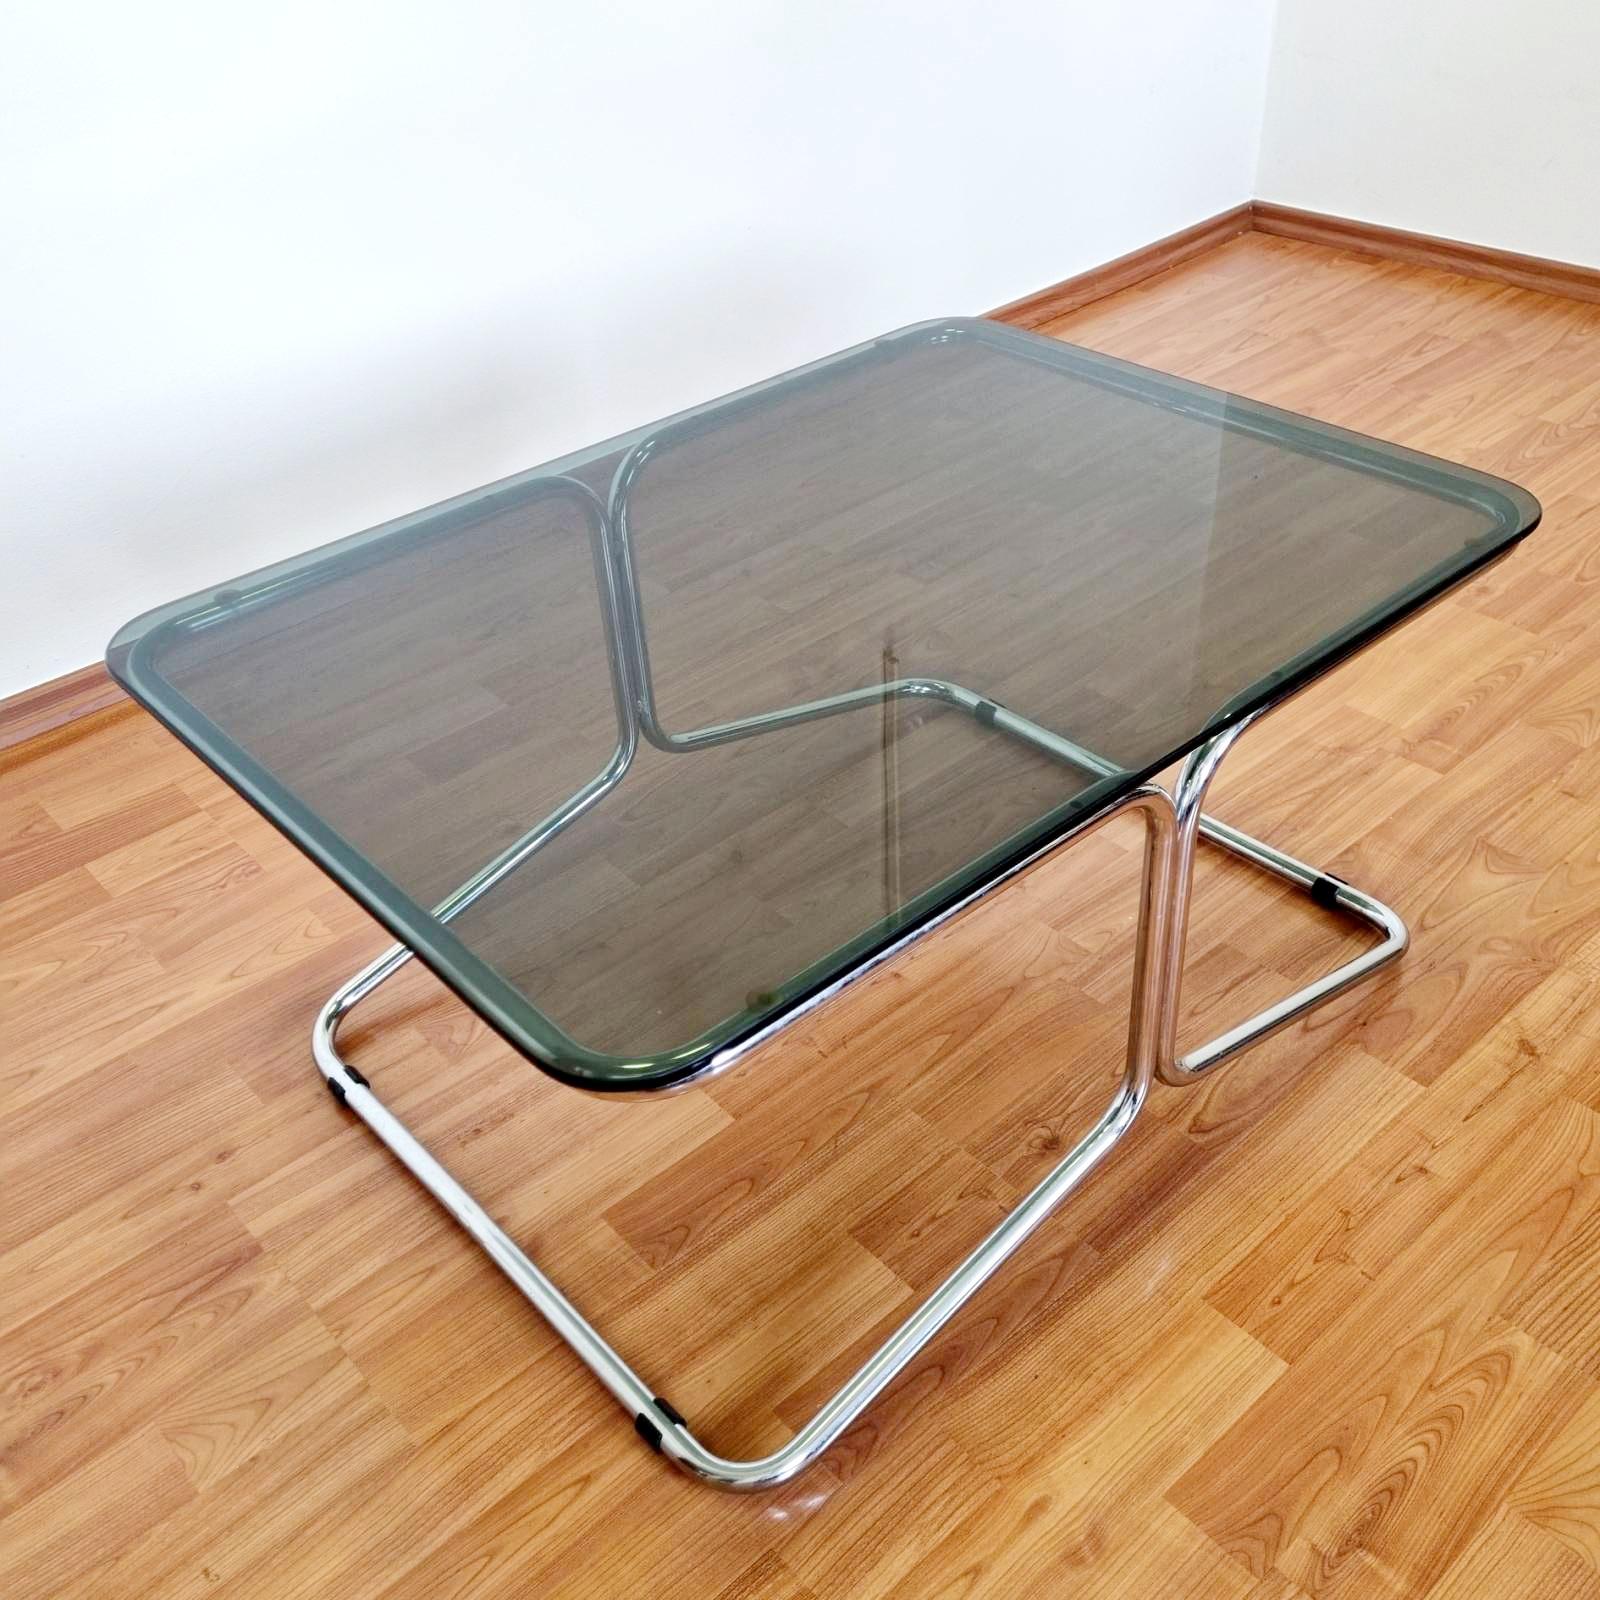 Coffee or side table in bauhaus style, made in Italy in the 70s.
The smoked glass surface shows some minor signs of use. In general in very good vintage condition.